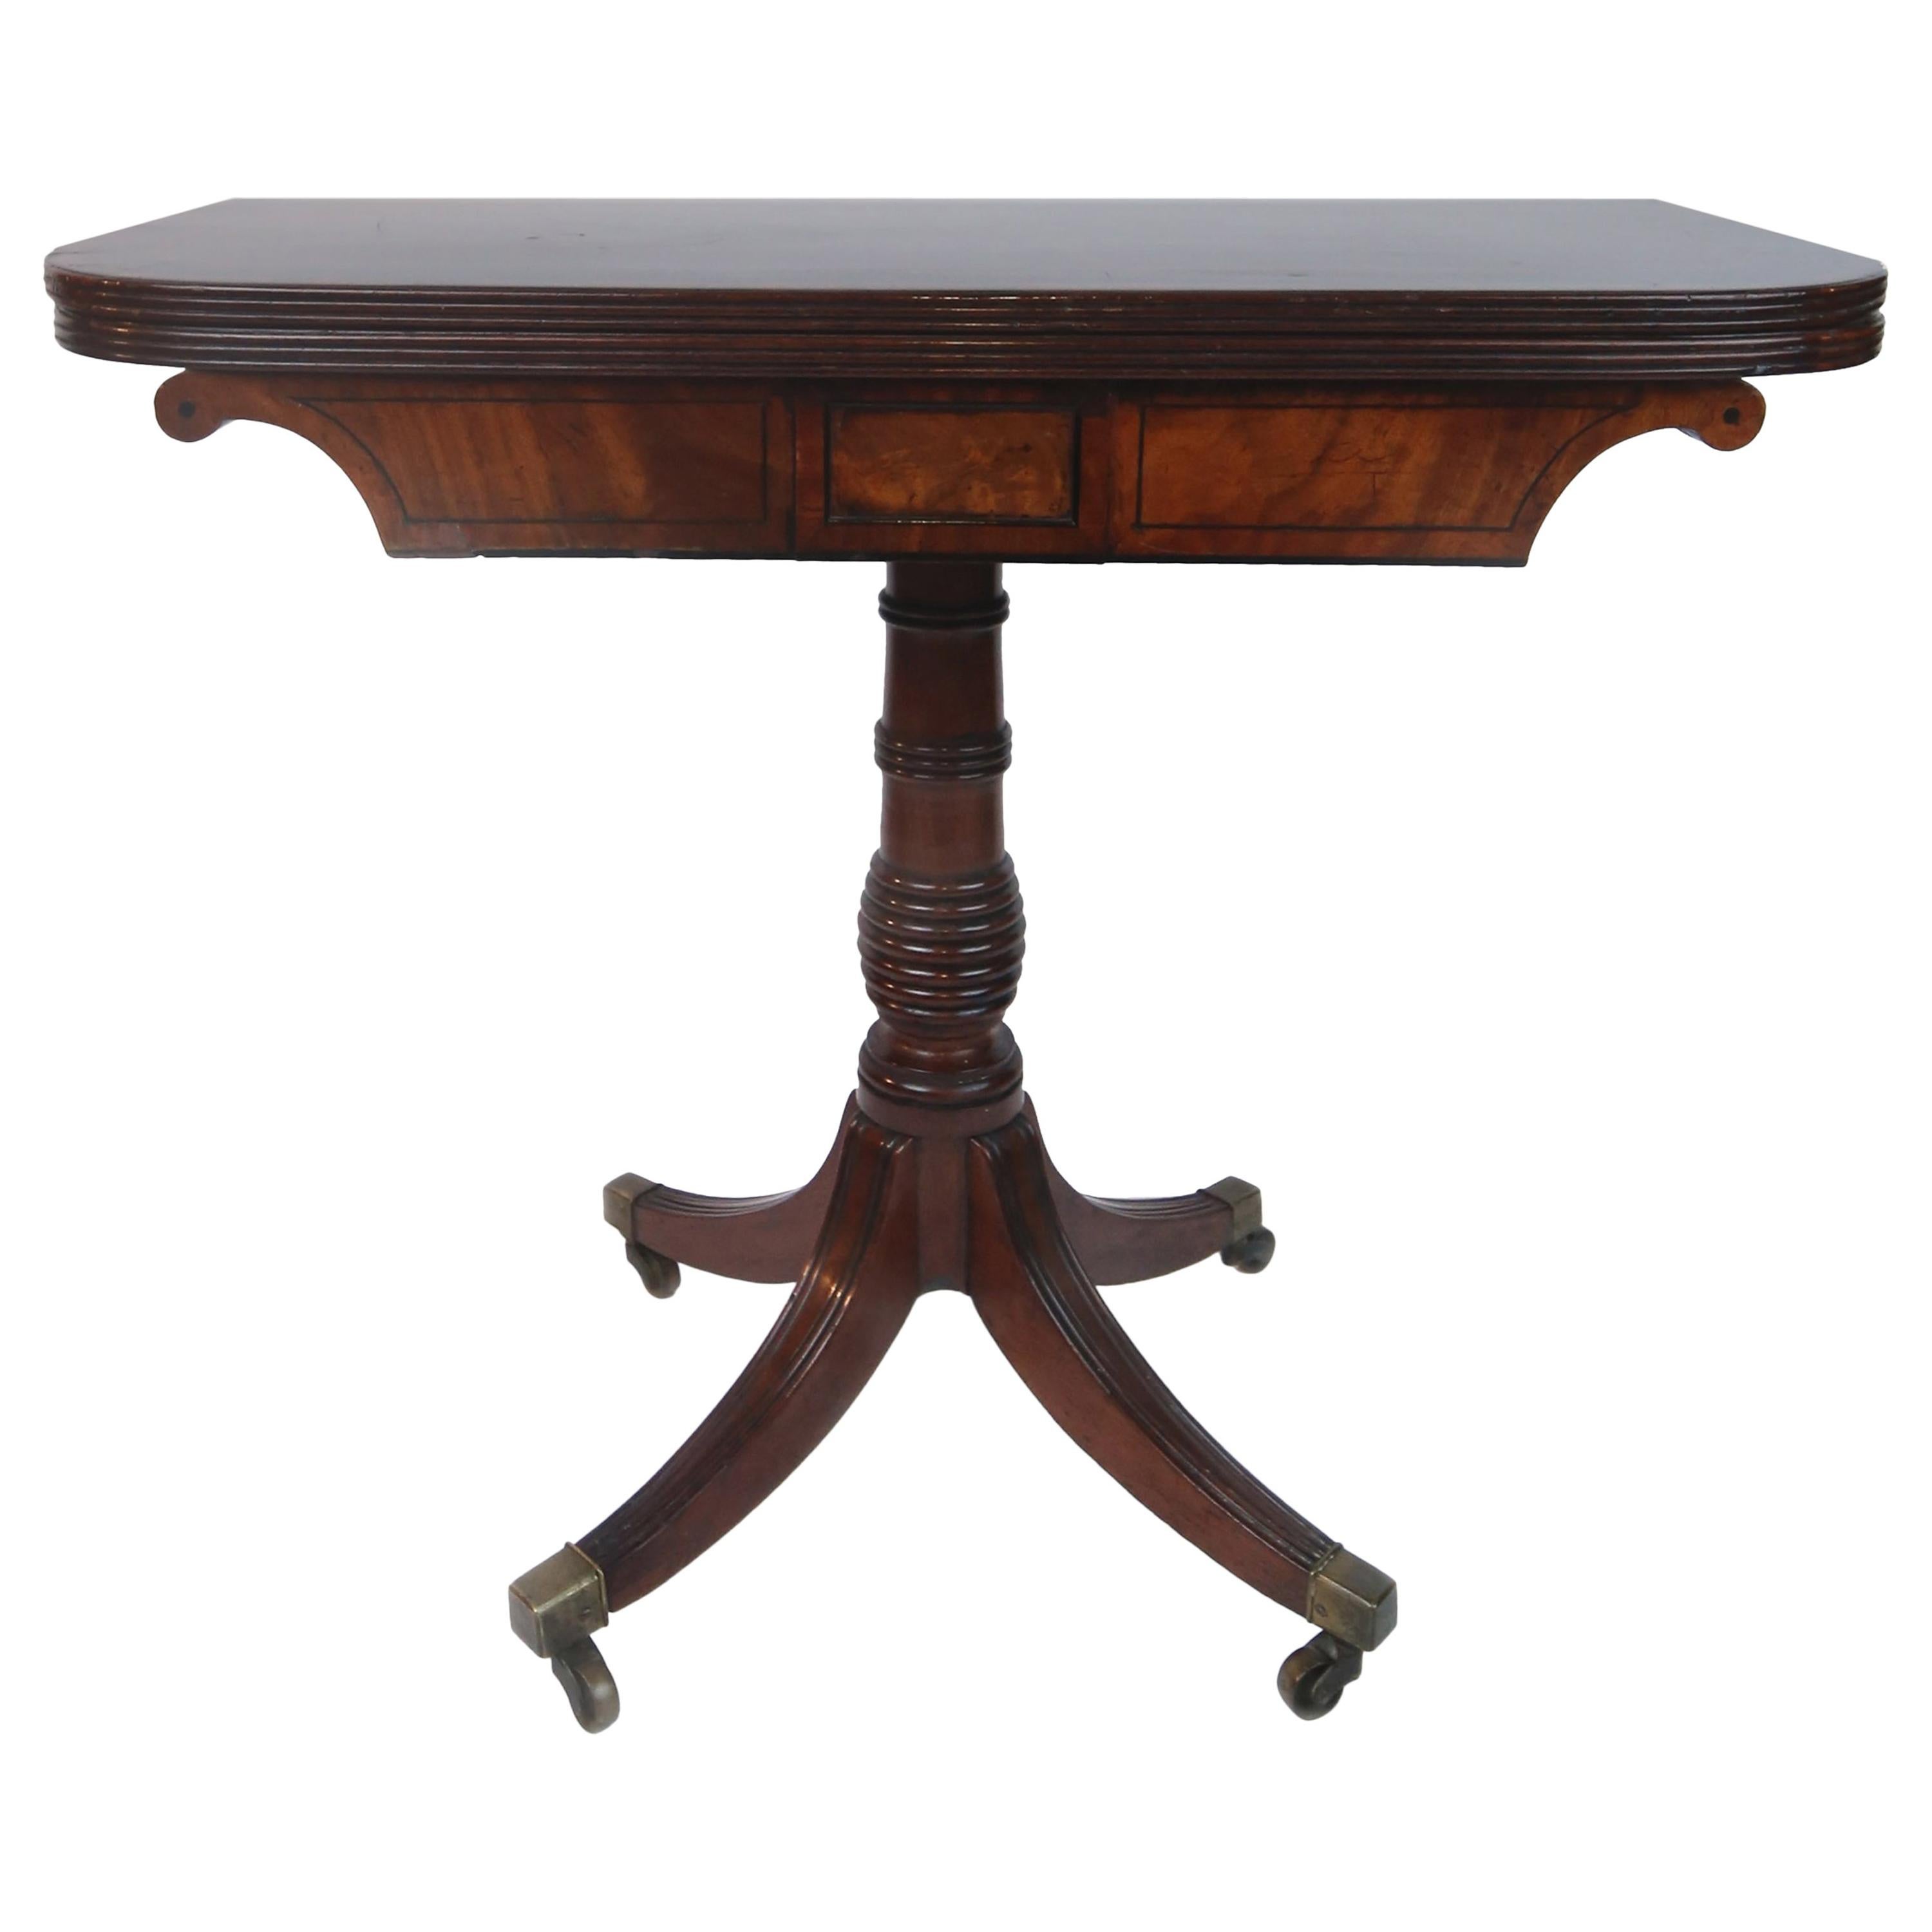 Early 19th Century William IV Card Table with Ebony Inlay and Turned Pedestal